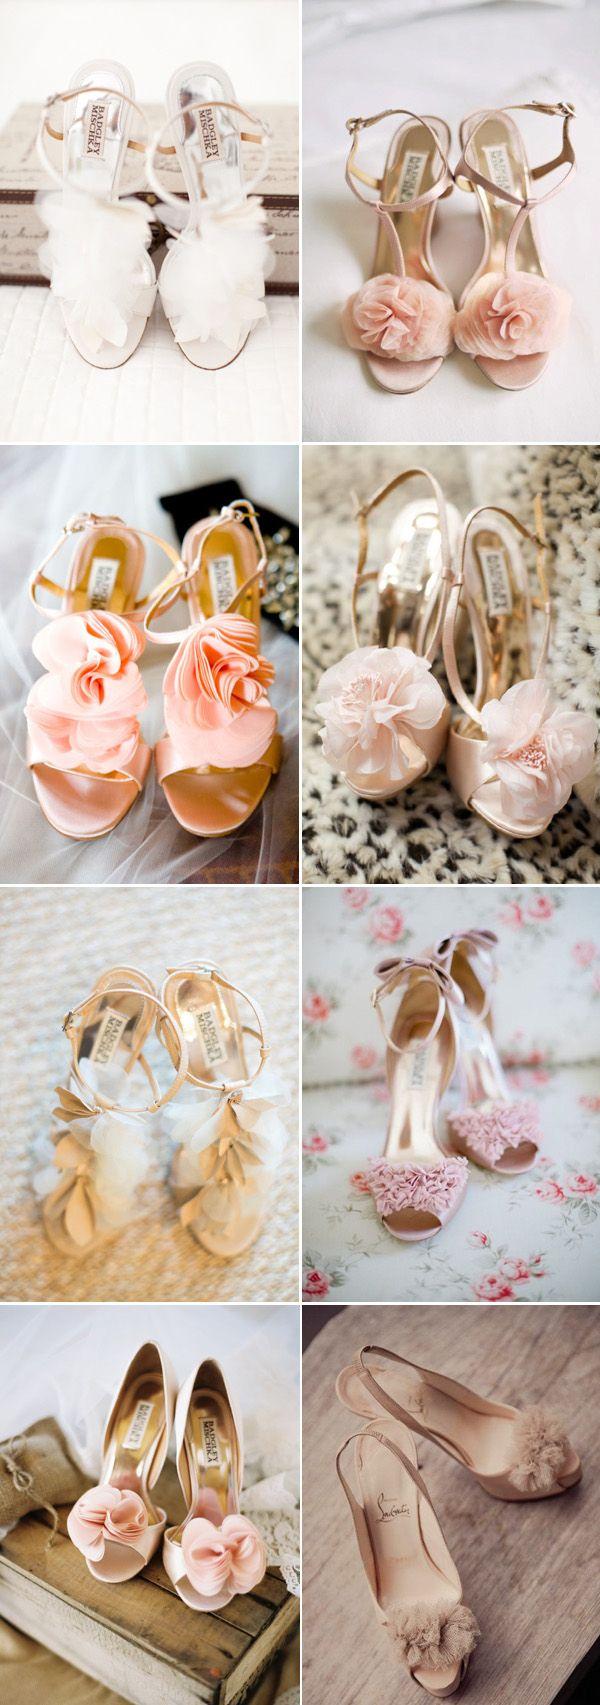 43-most-wanted-wedding-shoes-for-bride.jpg